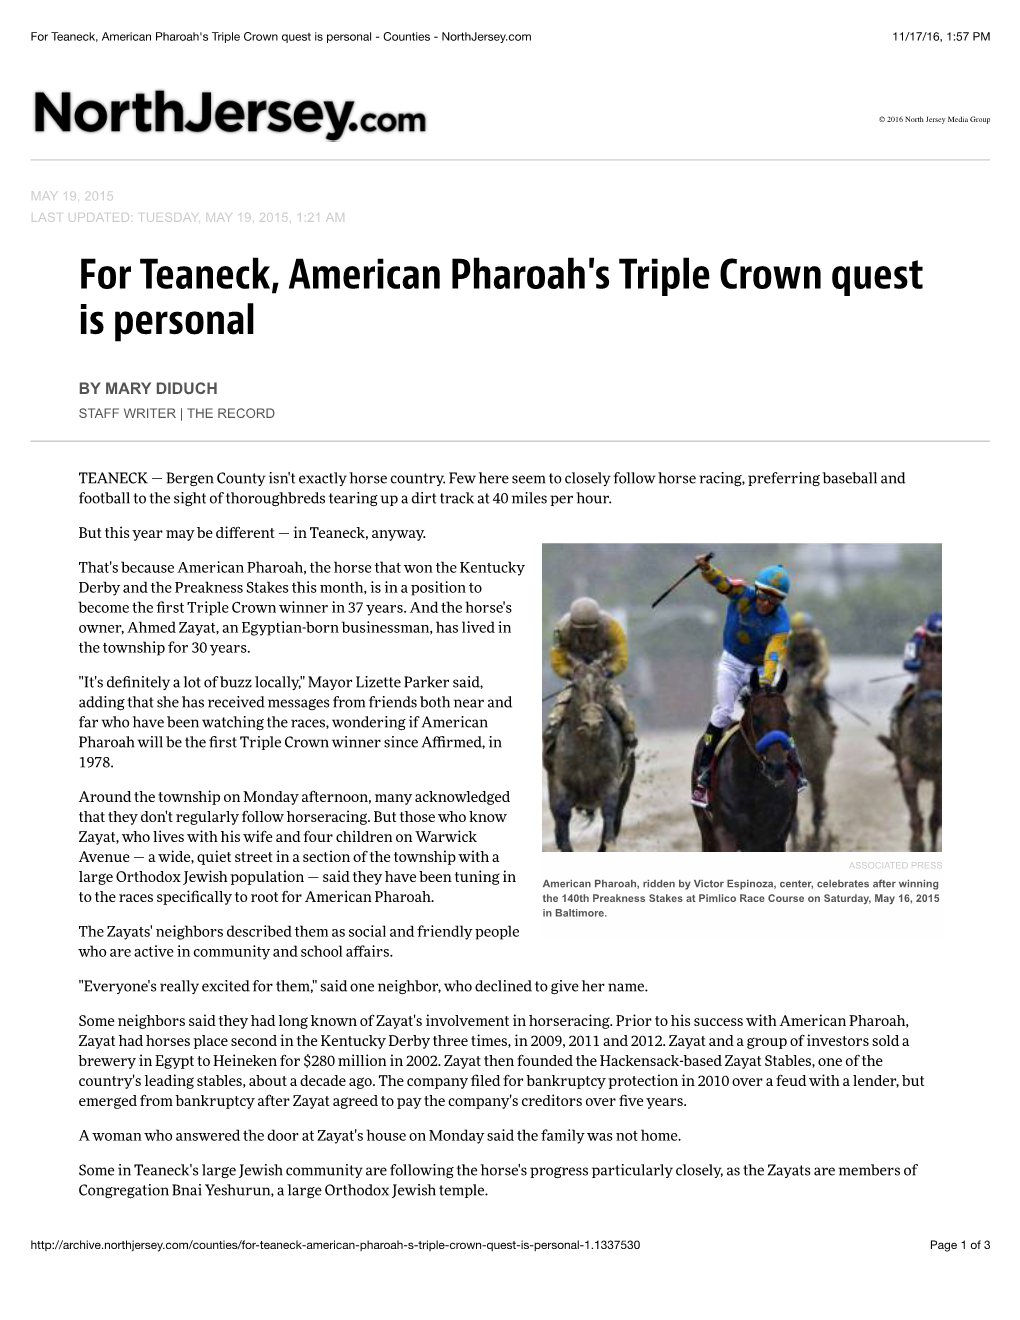 For Teaneck, American Pharoah's Triple Crown Quest Is Personal - Counties - Northjersey.Com 11/17/16, 1:57 PM